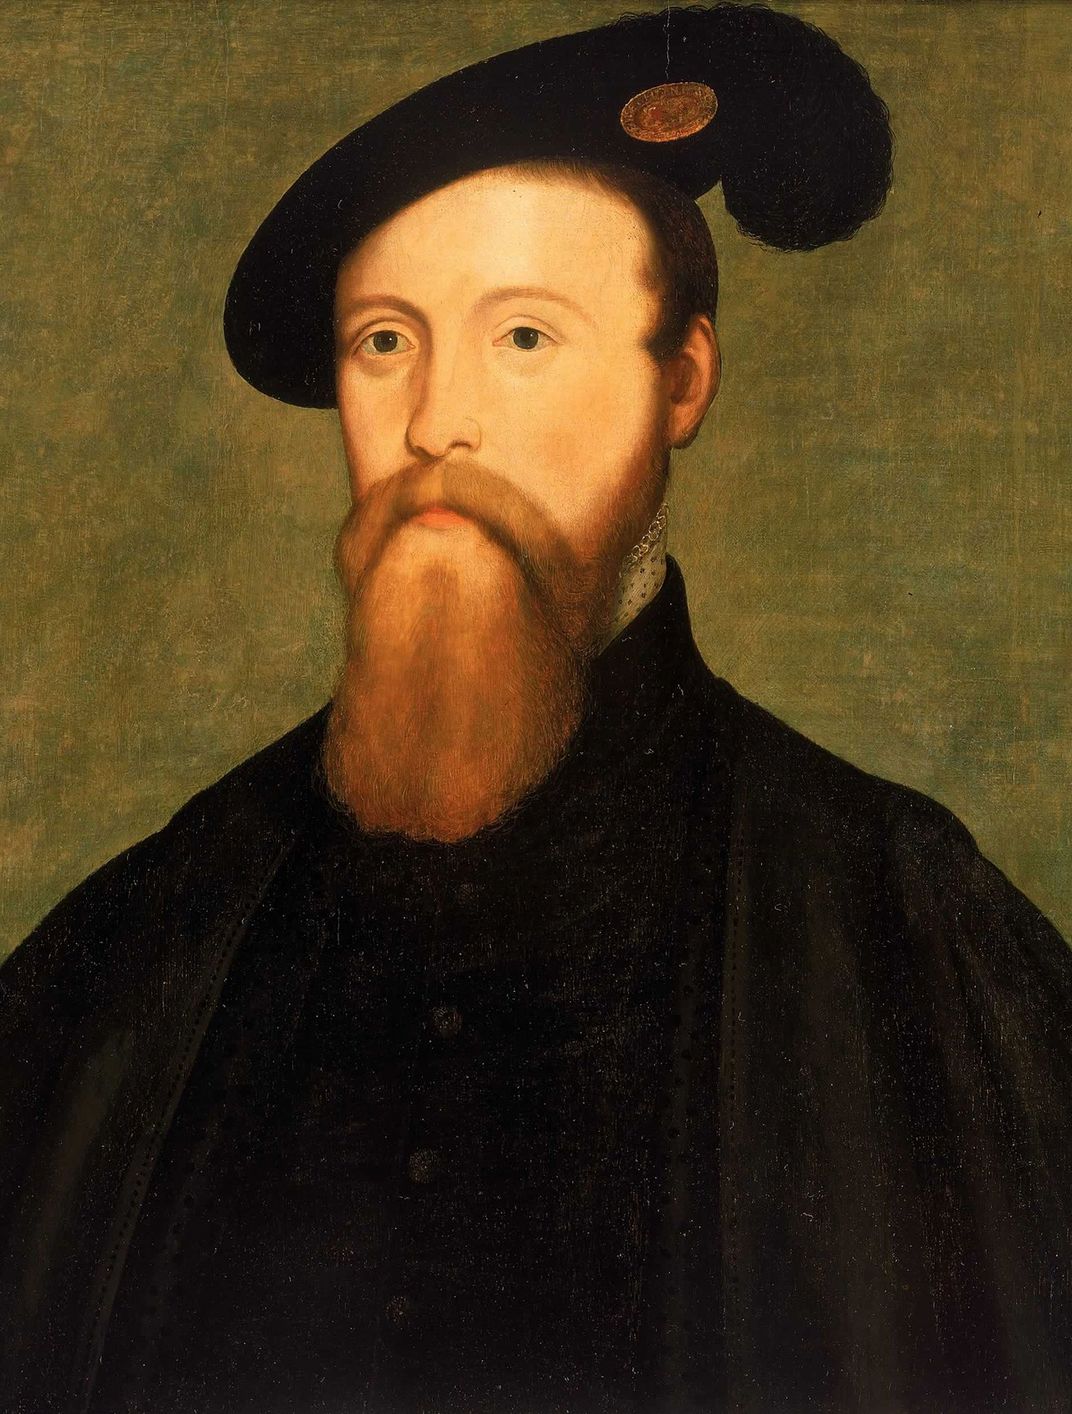 Thomas Seymour, brother of Jane Seymour and the fourth husband of Catherine Parr